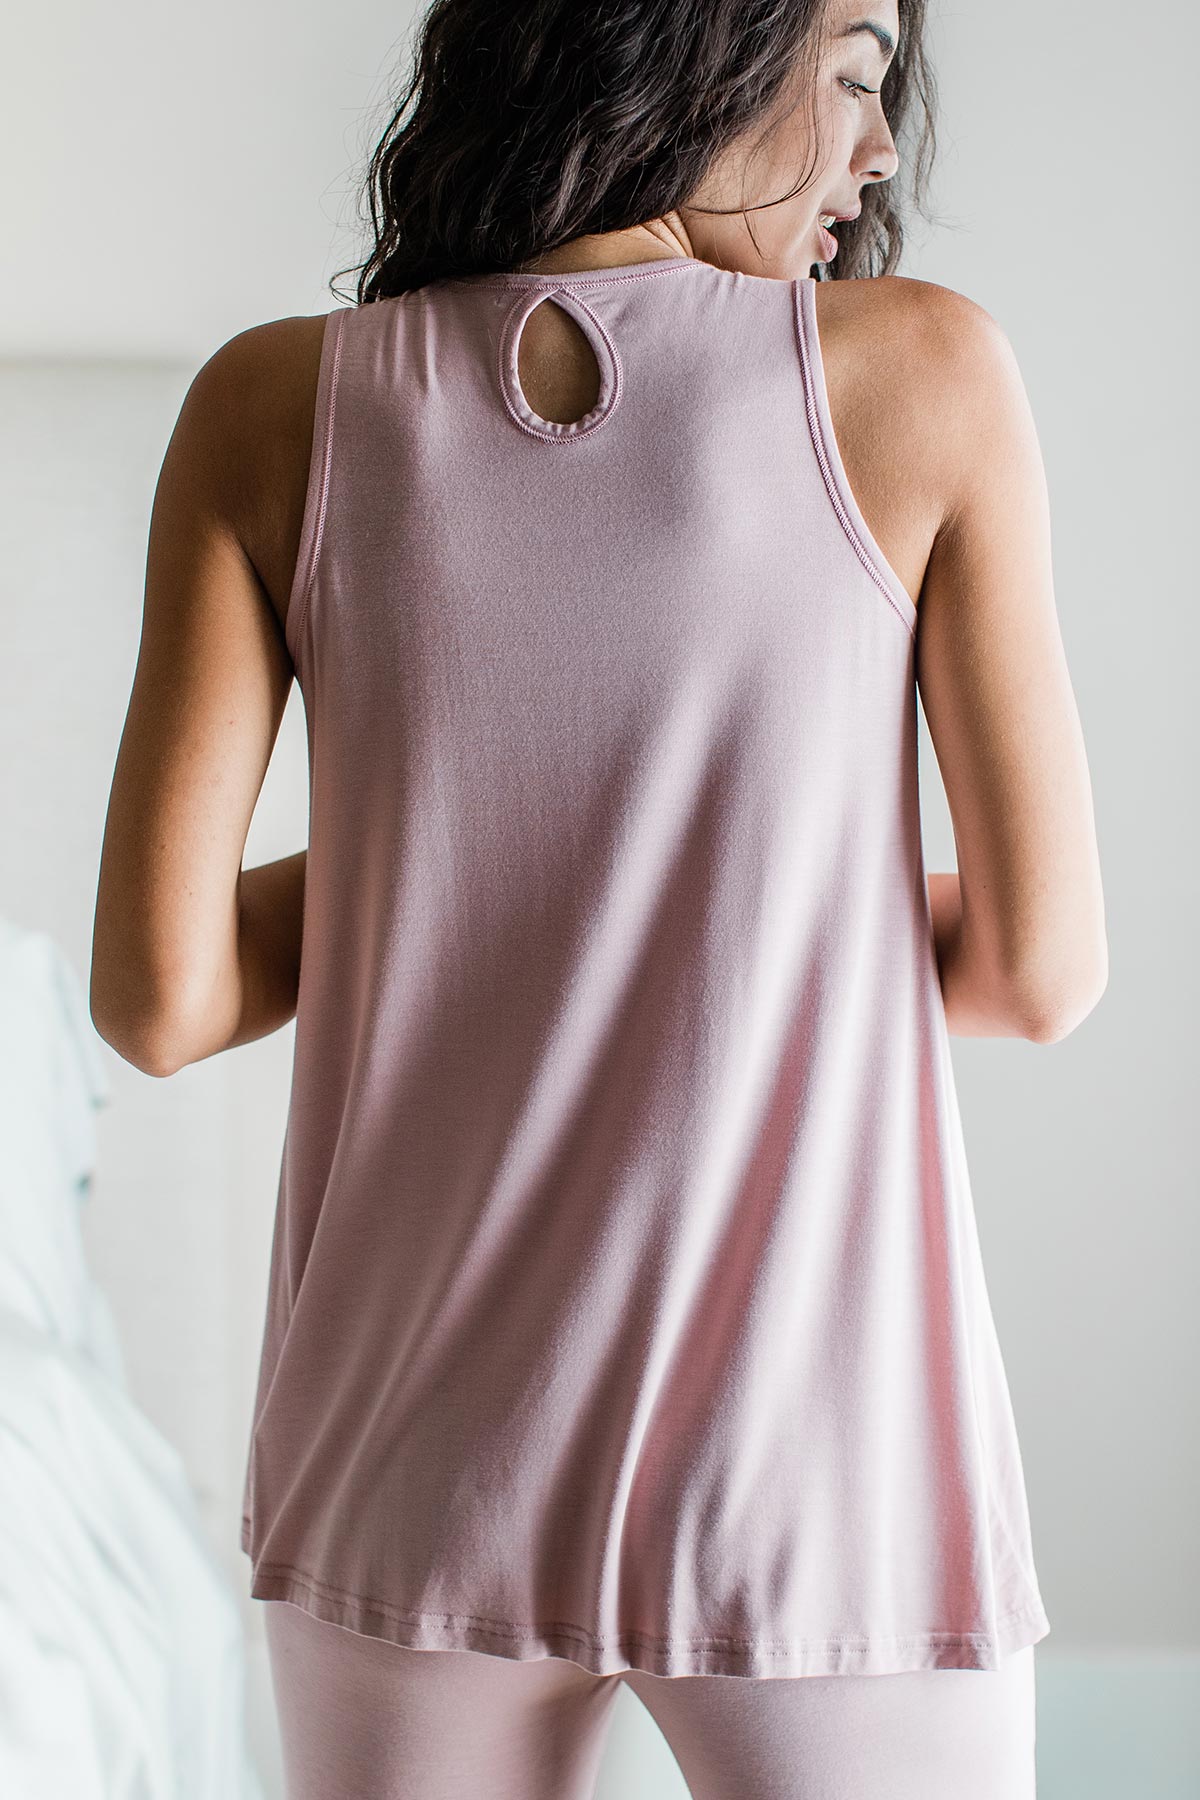 A woman standing with her back turned while looking off to the side, wearing Yala Delia Gathered Tank Bamboo Pajama Set in Lotus Pink